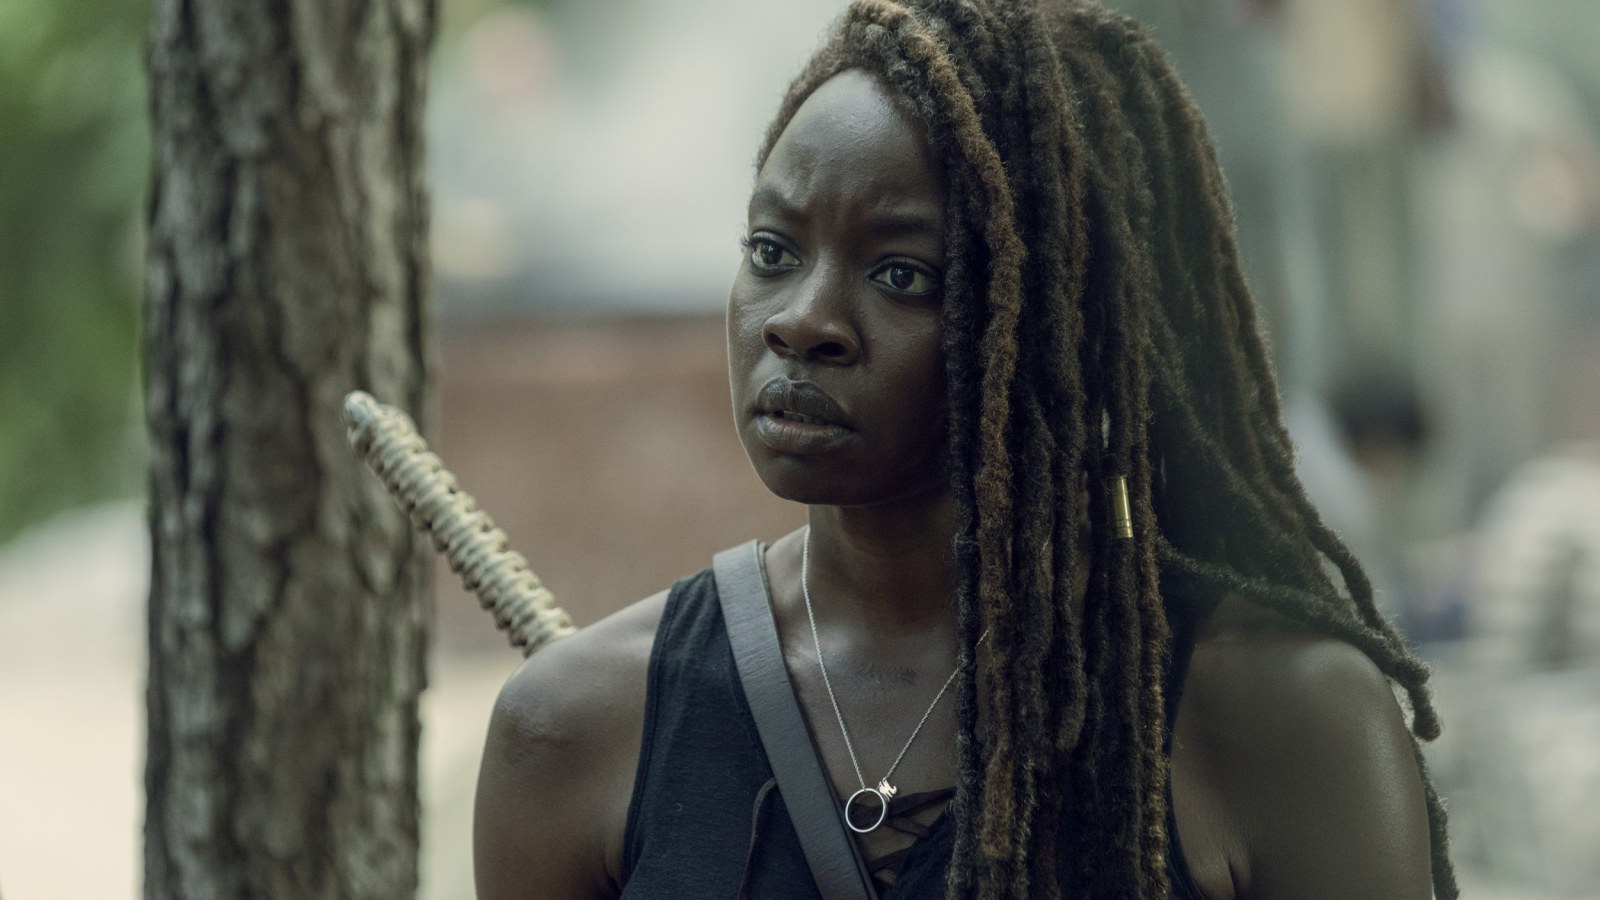 The Walking Dead Season 10 Premiere Spoilers Satellite Mystery Images, Photos, Reviews